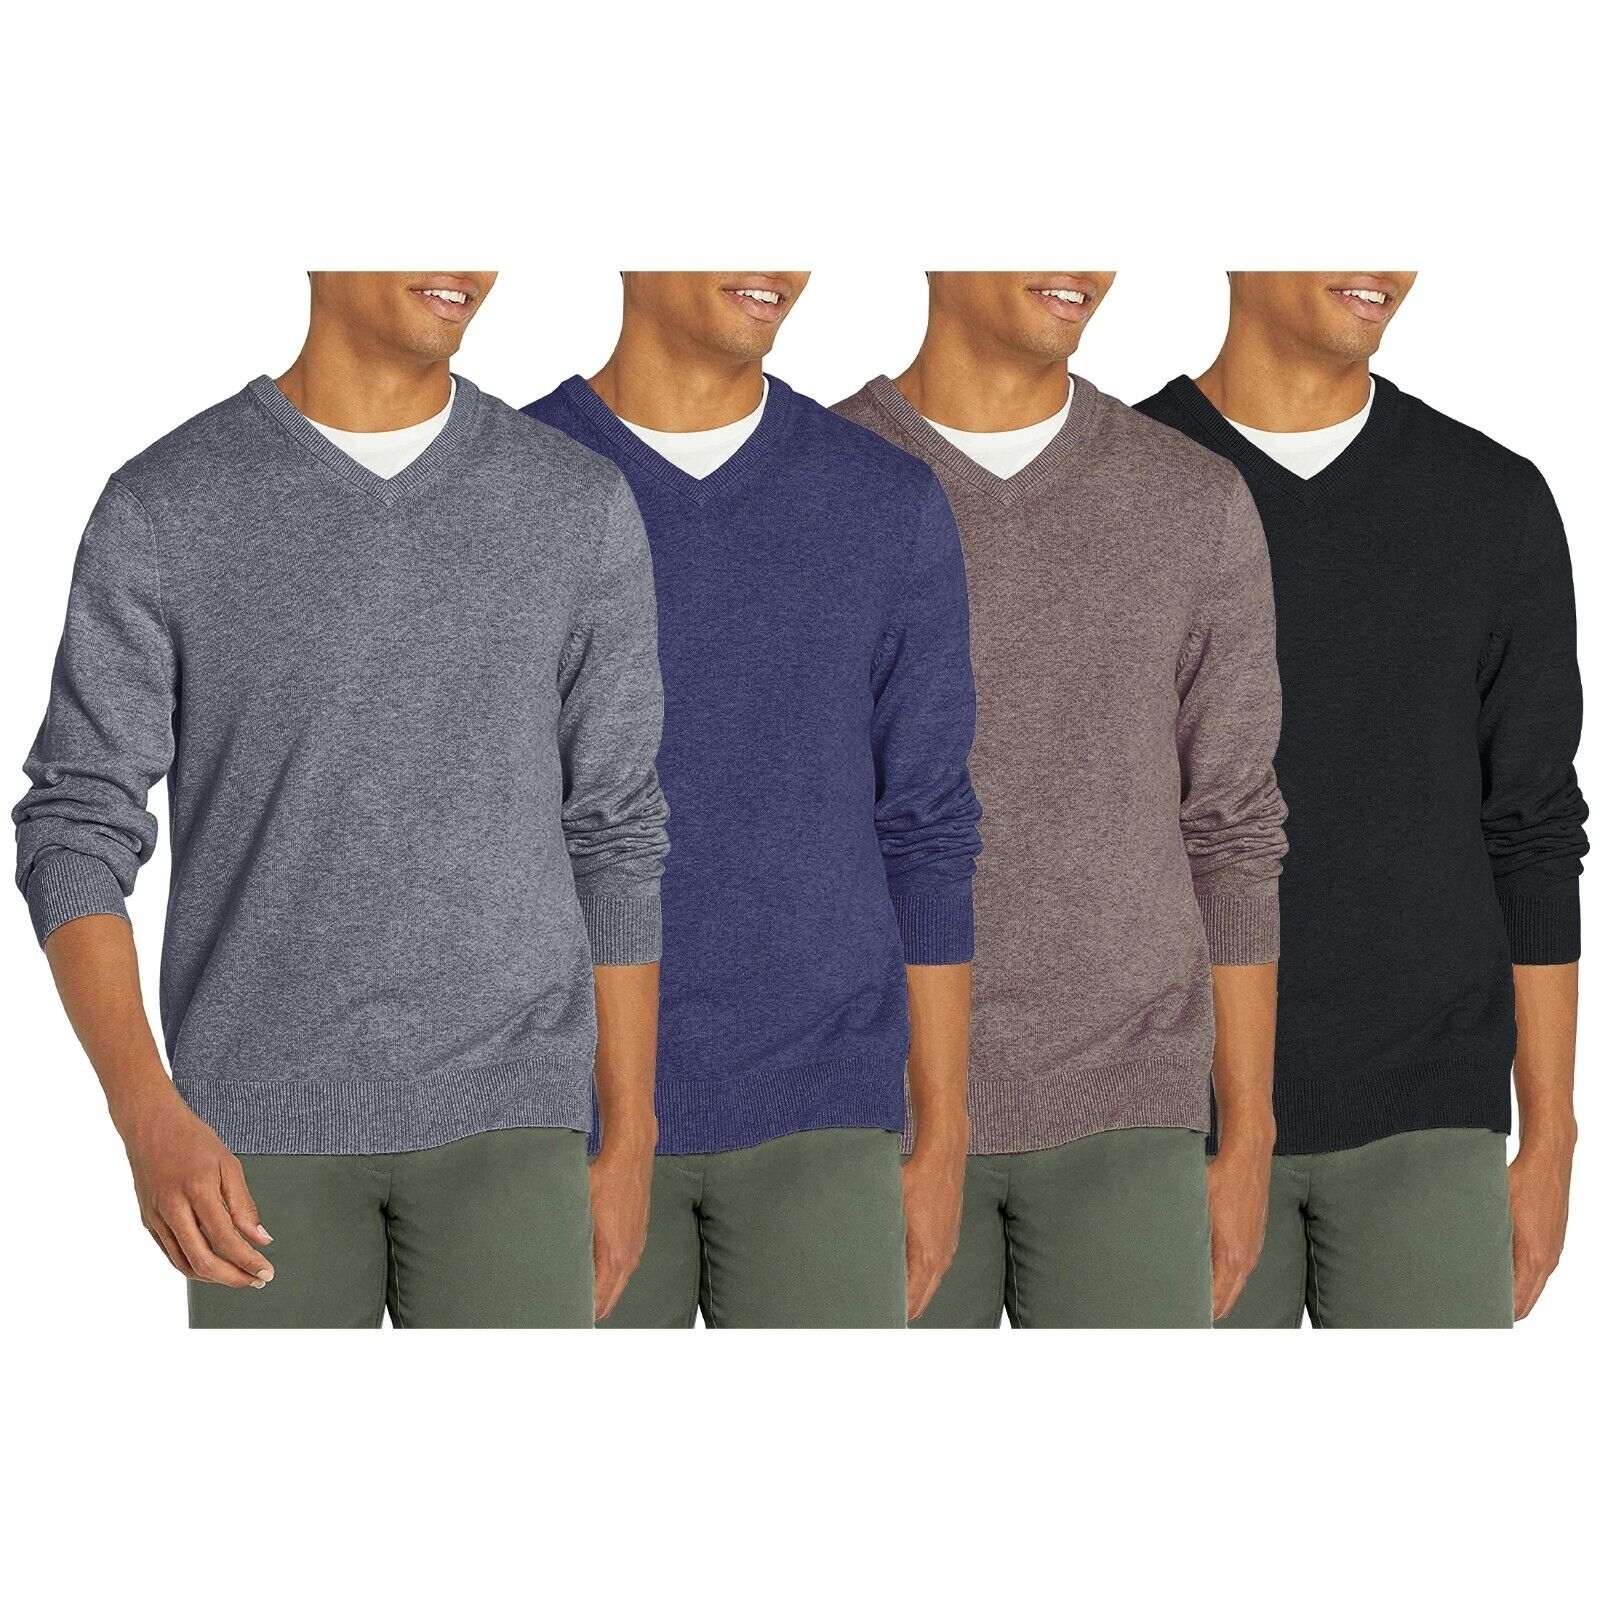 2-Pack Men's Casual Cozy Ultra Soft Slim Fit Warm Knit Pullover V-Neck Sweater - Black&Grey, Small